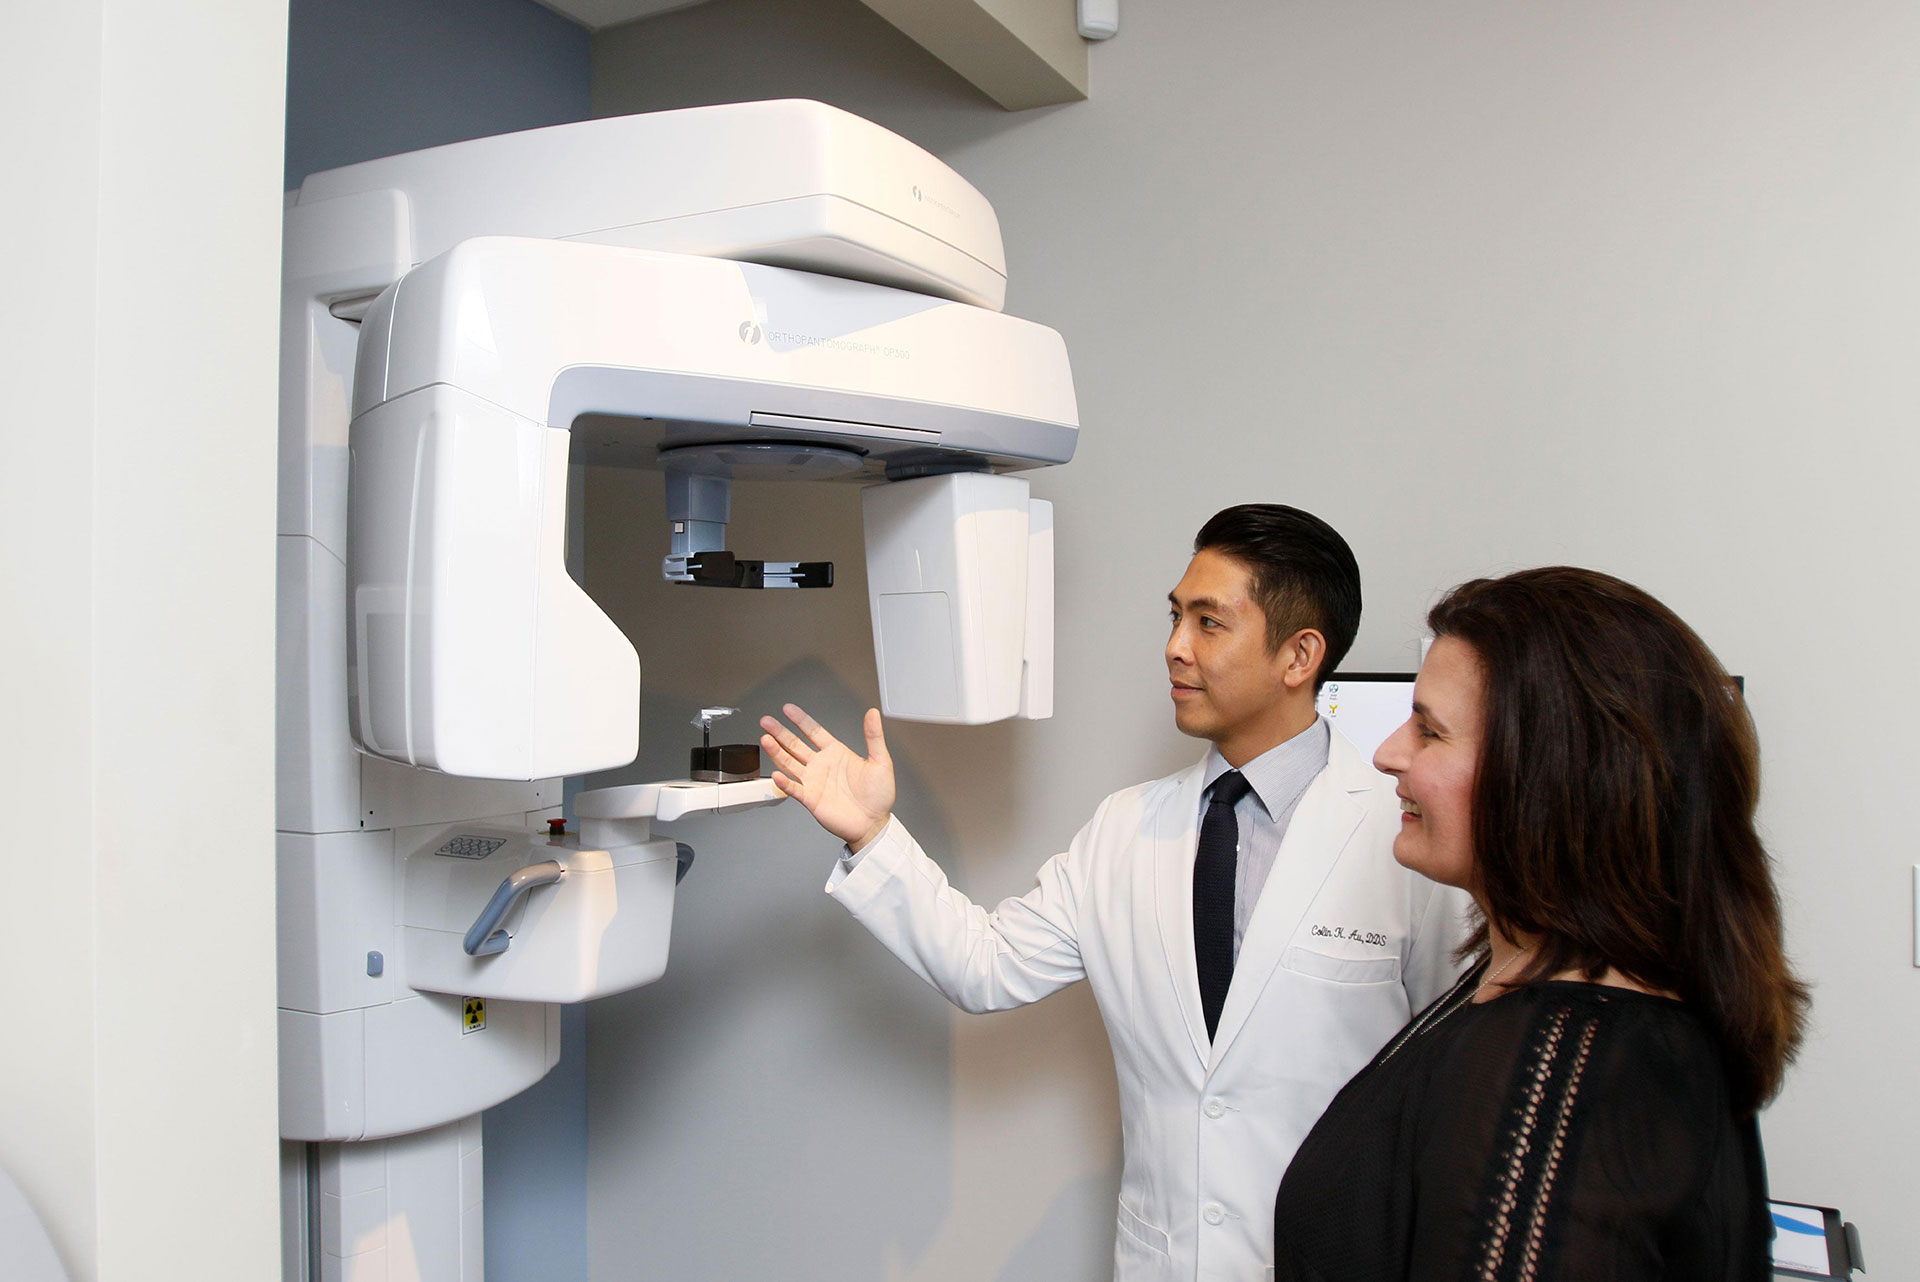 The image shows a person standing next to a large, modern-looking 3D scanner in what appears to be a medical or dental office setting. A second person is pointing at the scanner with interest.